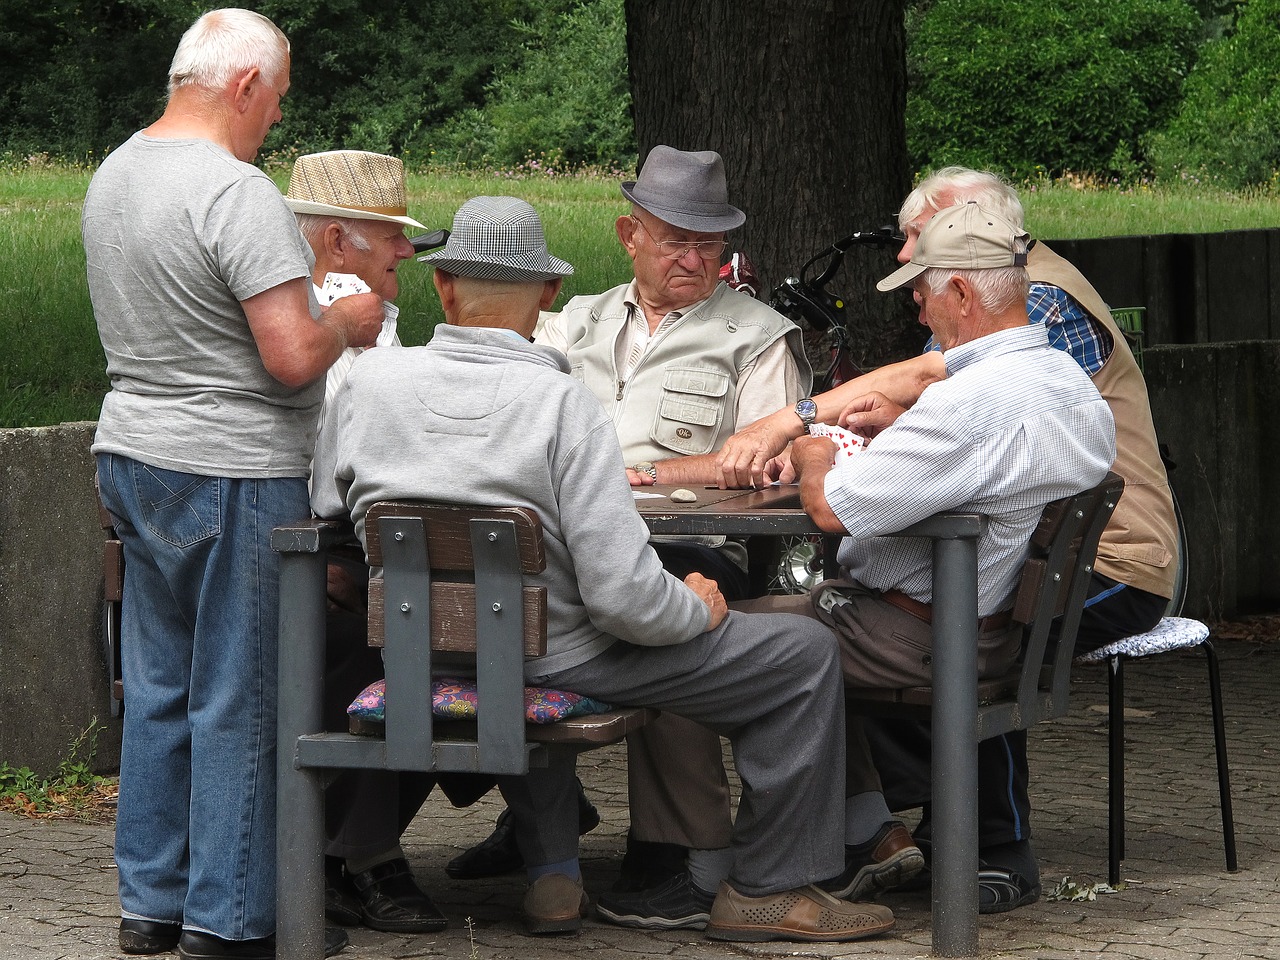 pensioners card game pastime free photo